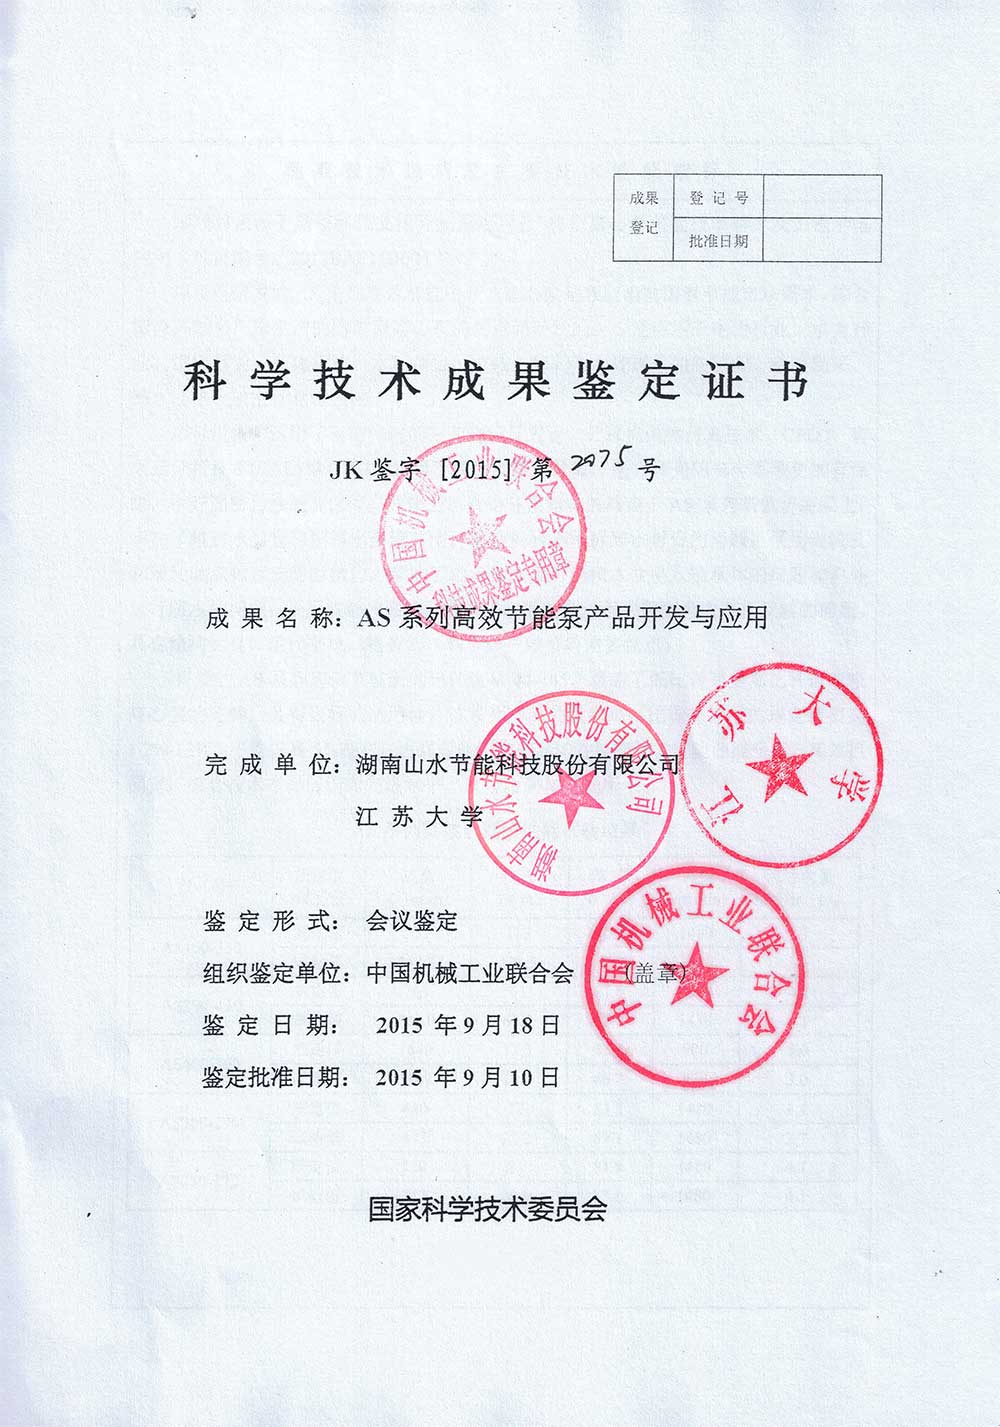 AS high efficiency pump firm certificate of scientific and technological achievements 